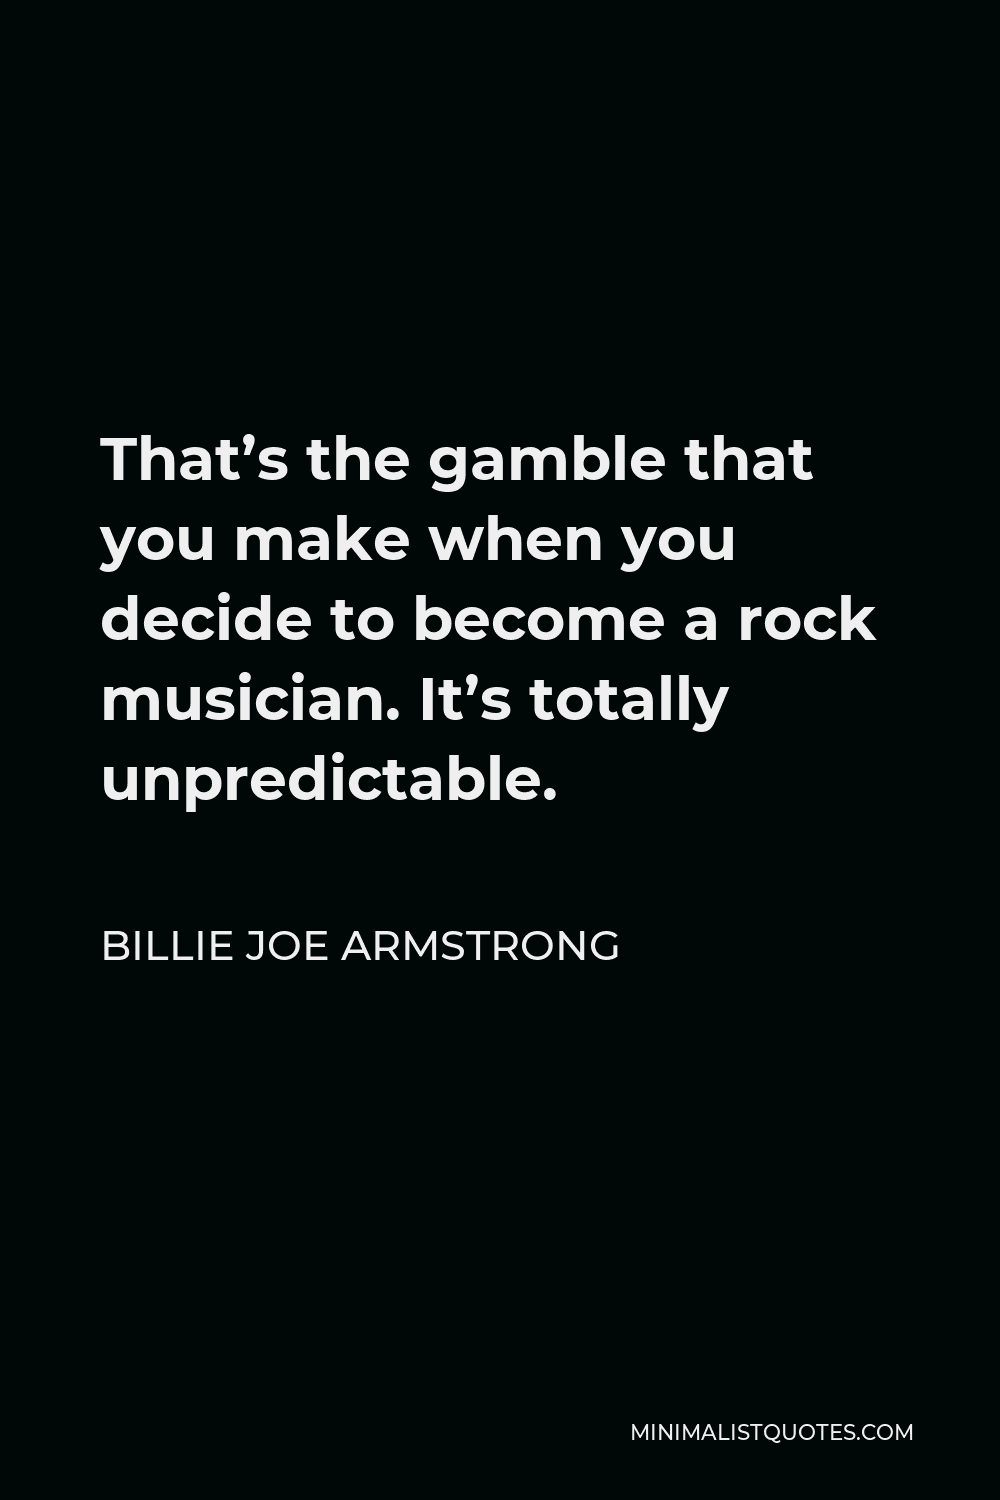 Billie Joe Armstrong Quote - That’s the gamble that you make when you decide to become a rock musician. It’s totally unpredictable.